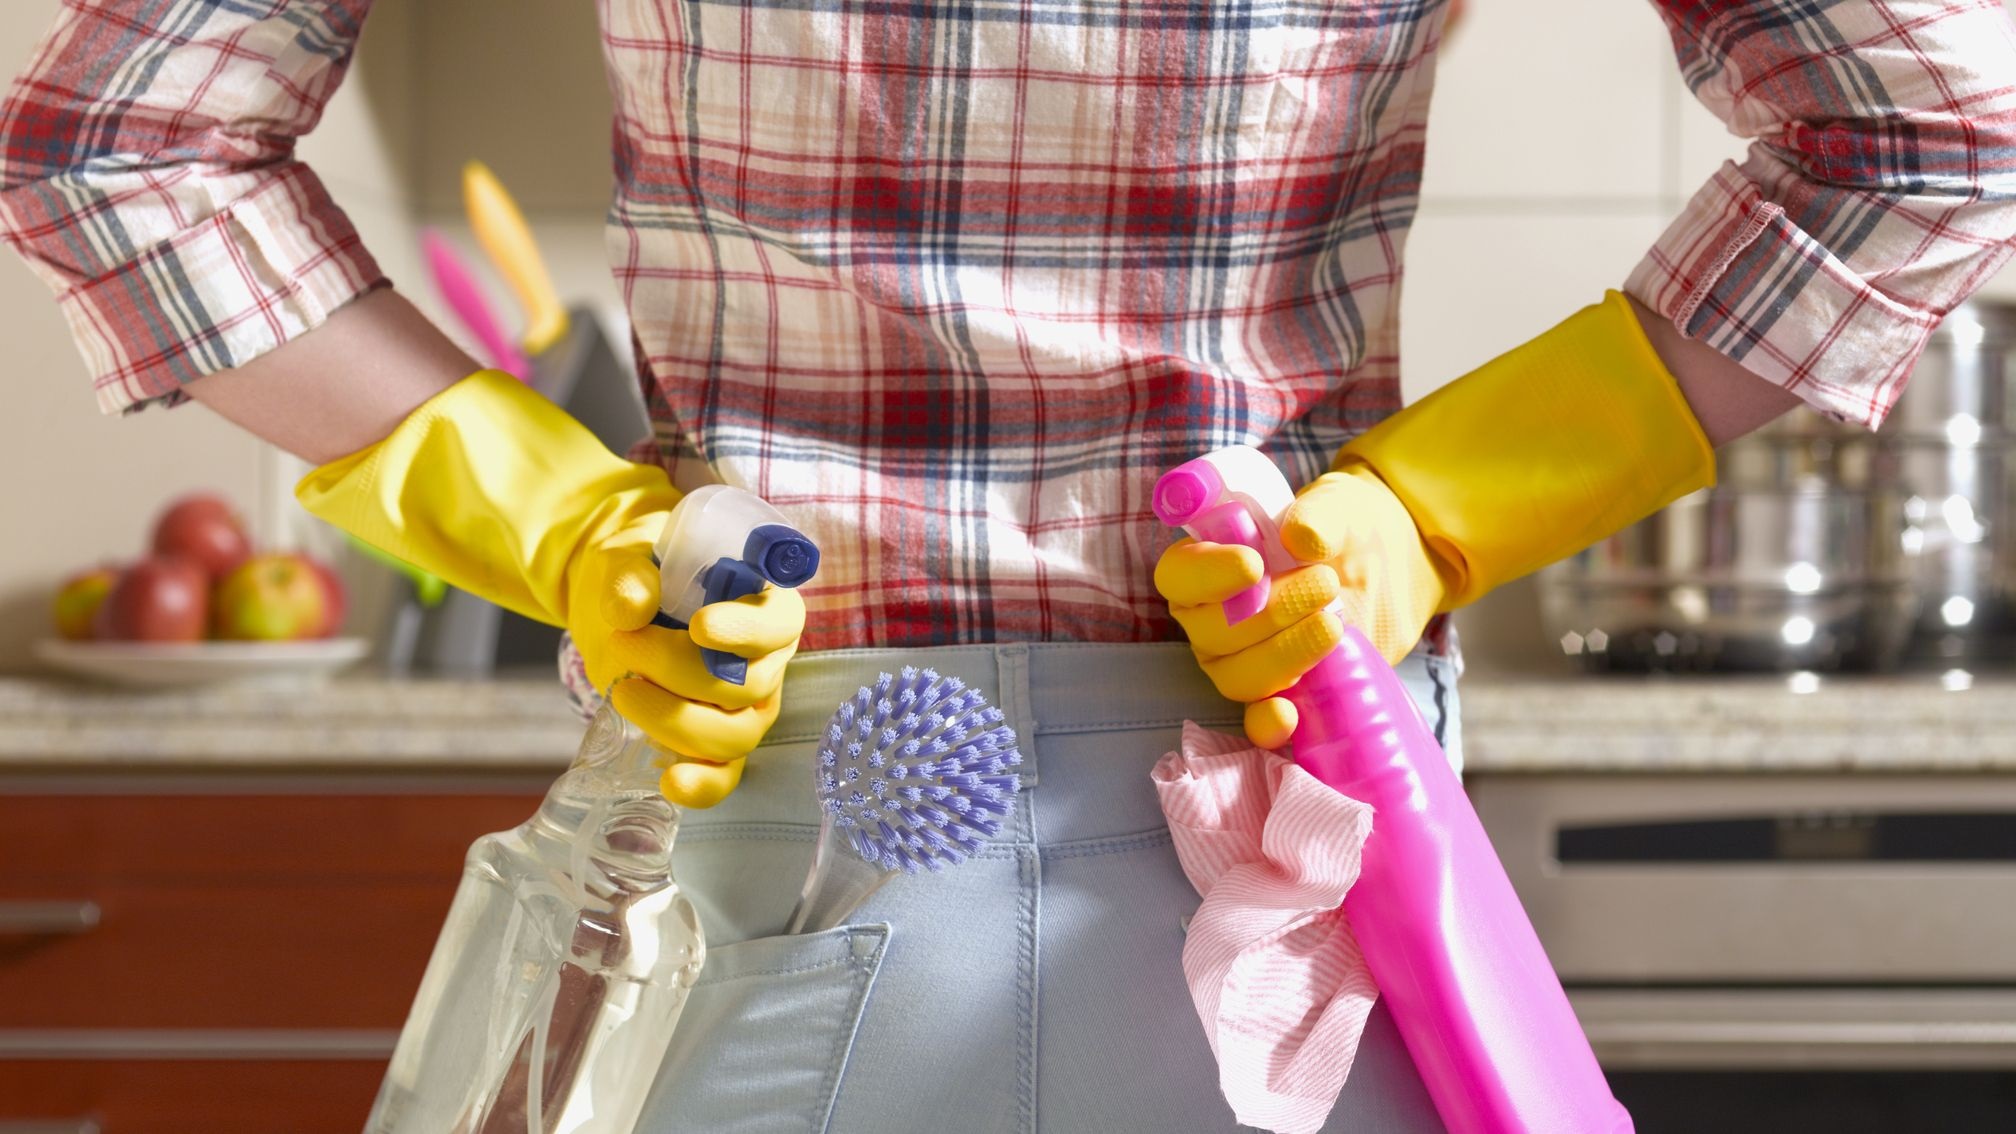 If You Are Looking For An Amazing Cleaning Service Call Jan-Pro